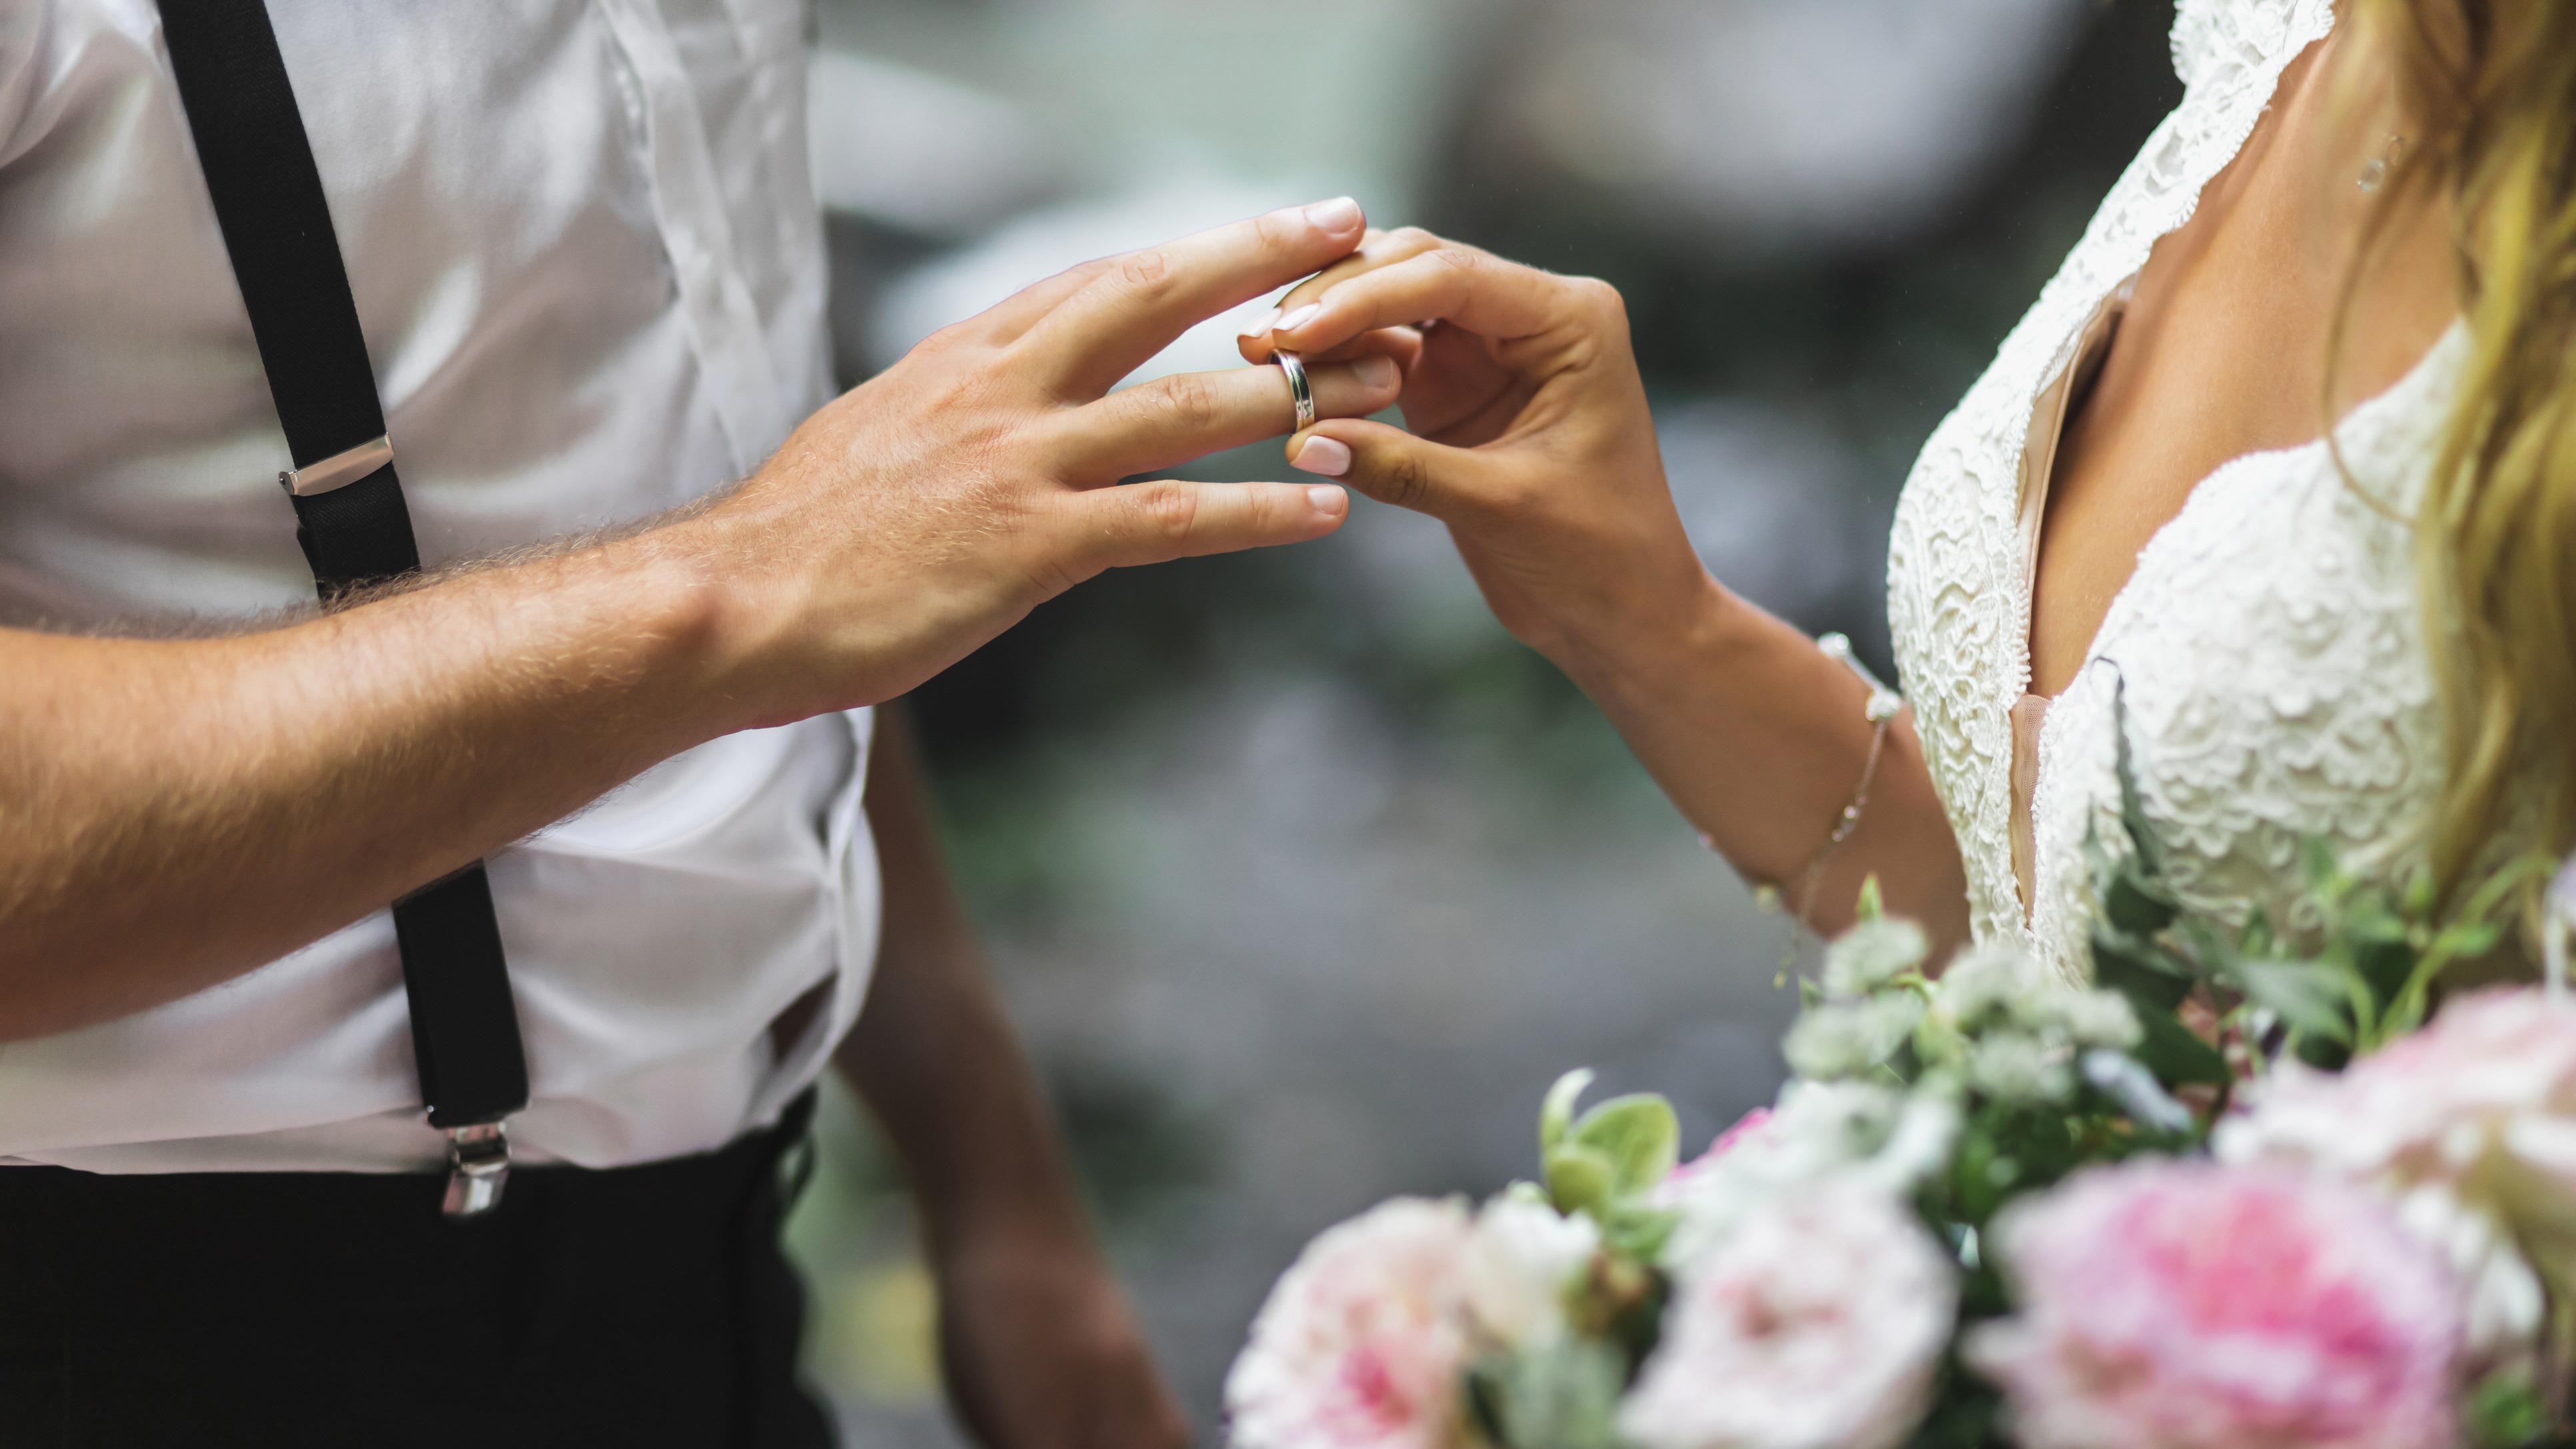 Woman Asks Fiancé To Take 'In Sickness' Out Of Vows: 'I Hate Taking Care Of Sick People'